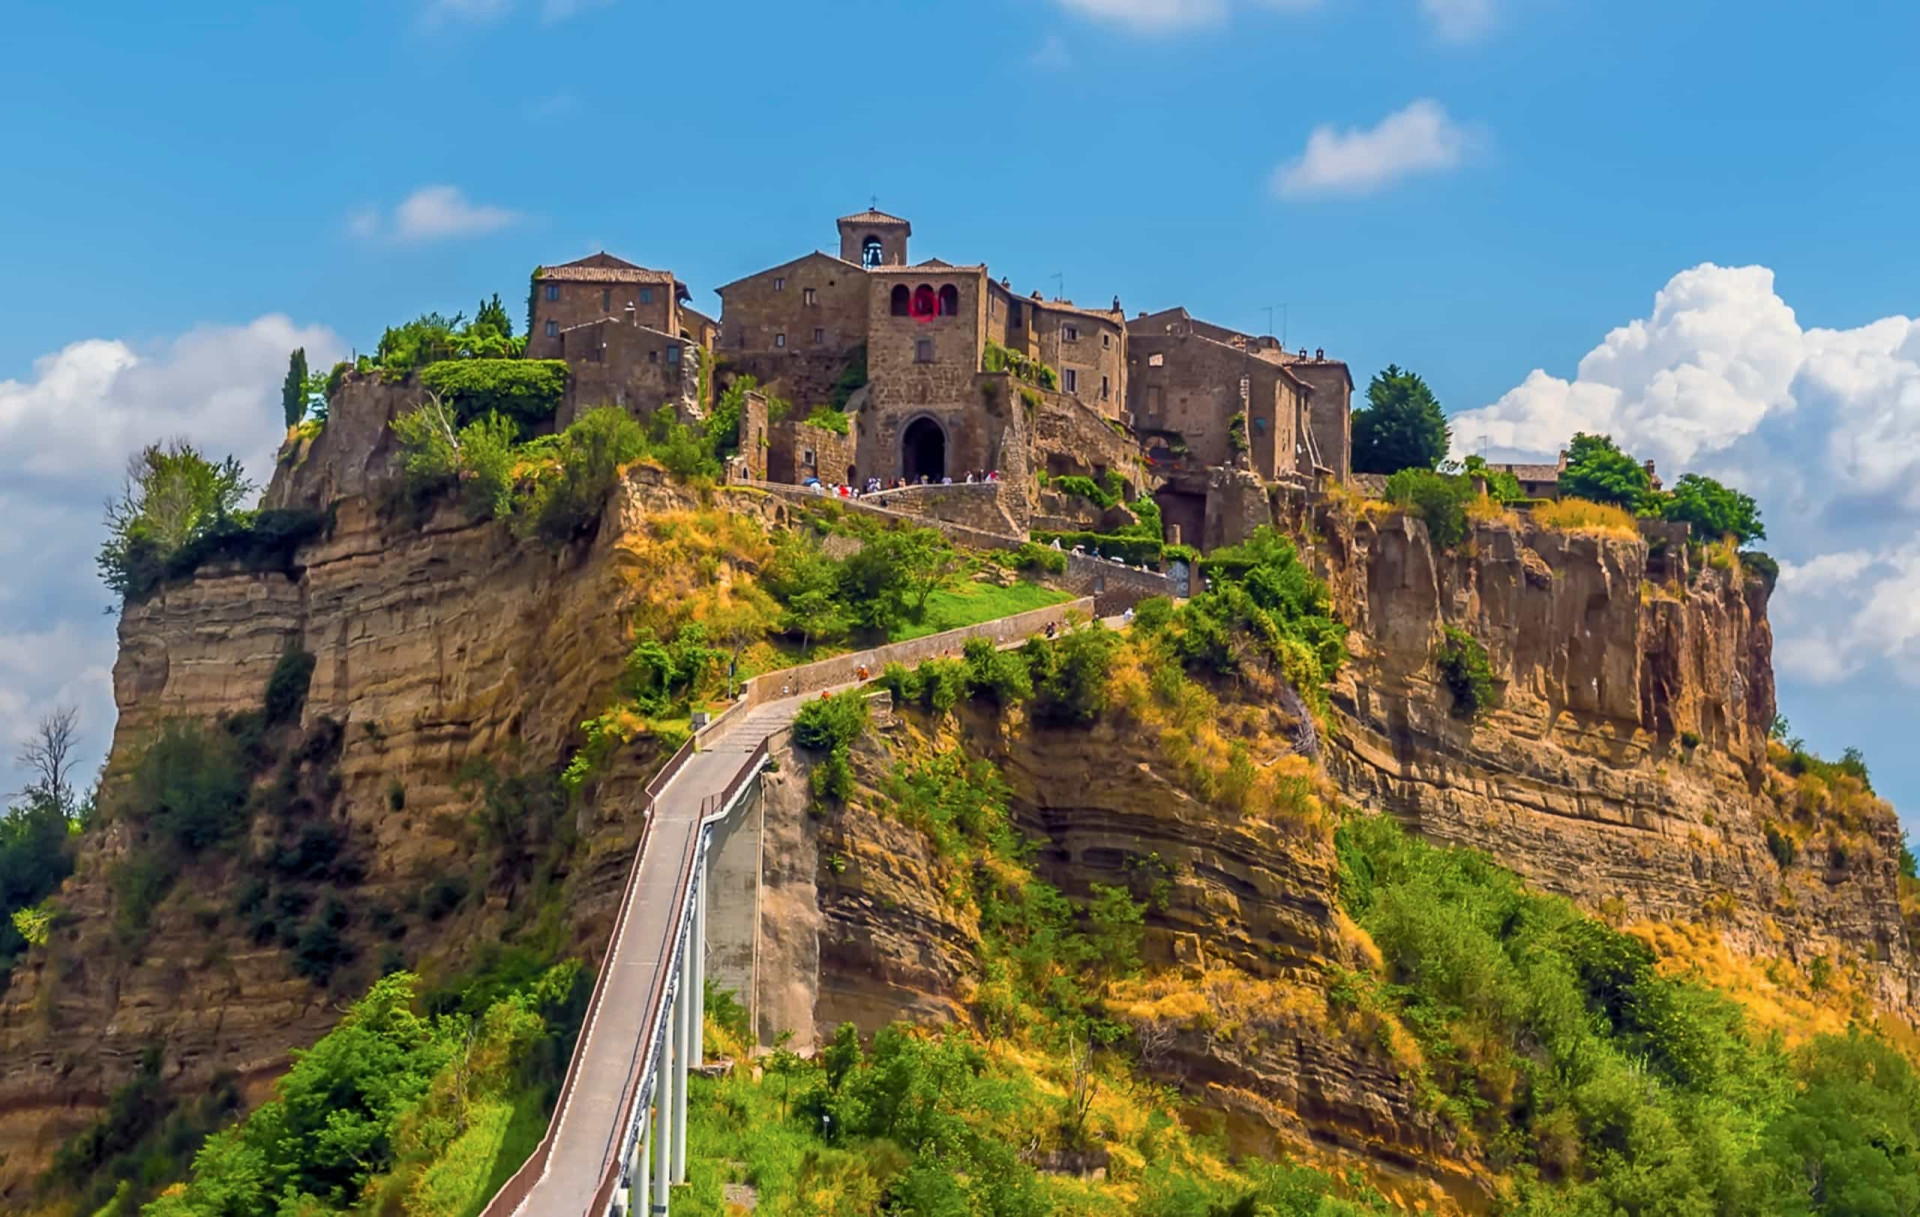 <p>Enjoying a magical and surreal location set half-way between Orvieto and Lake Bolsena, this amazing citadel can only be reached by crossing a narrow pedestrian bridge. Civita di Bagnoregio is sometimes called the "city that is dying" due to the constant erosion of the rock on which it is placed.</p>